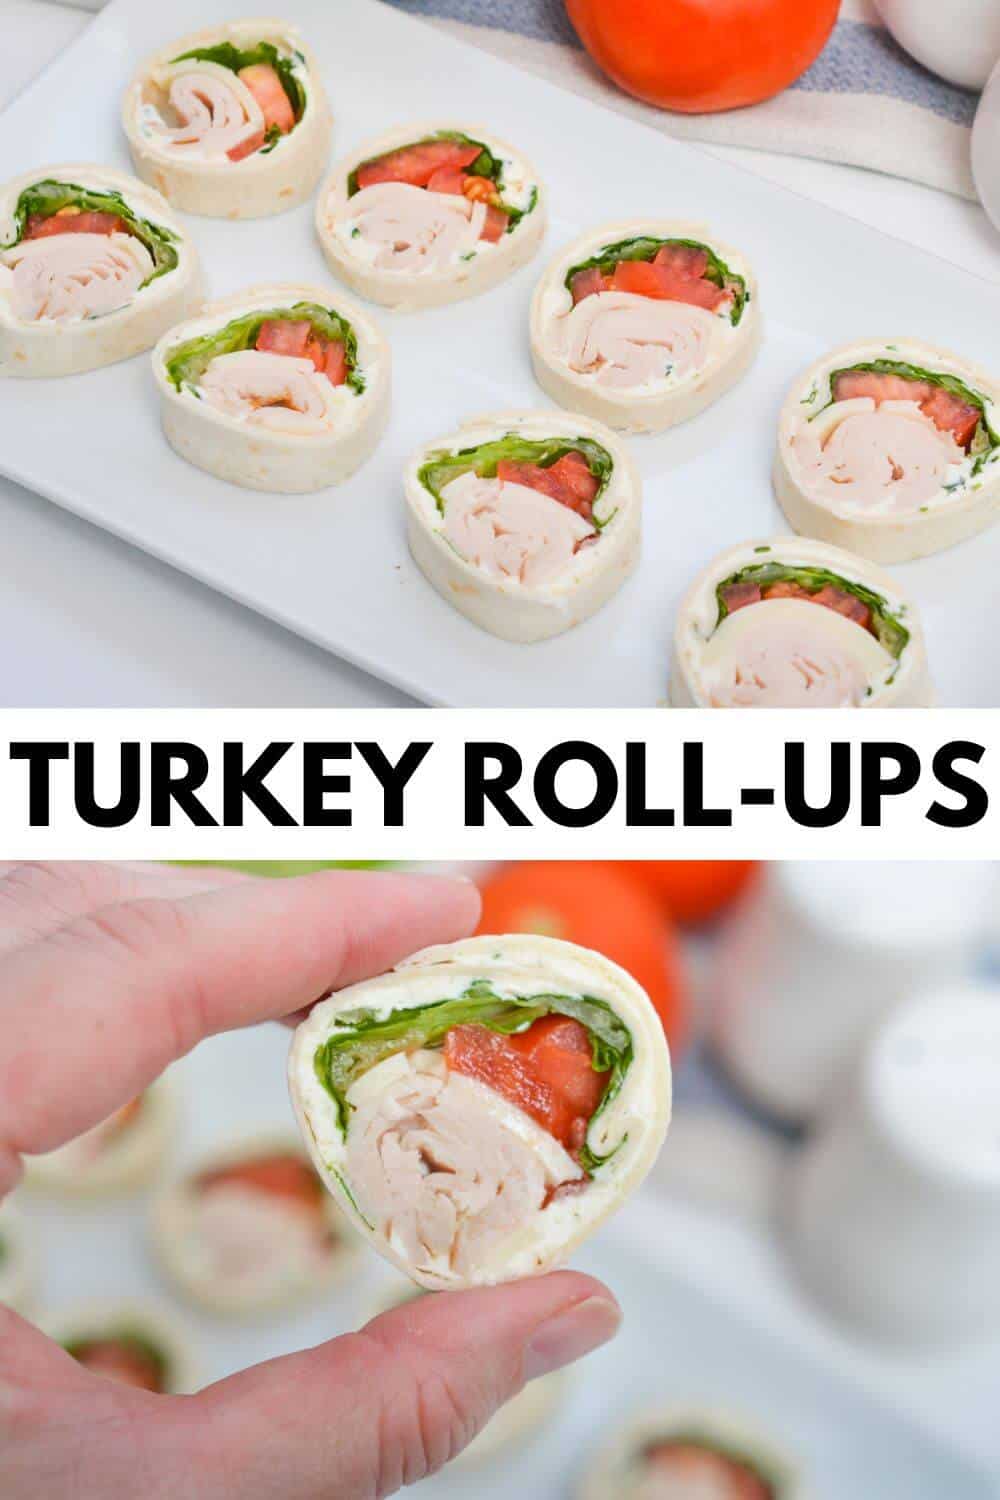 Turkey roll ups on a white plate.